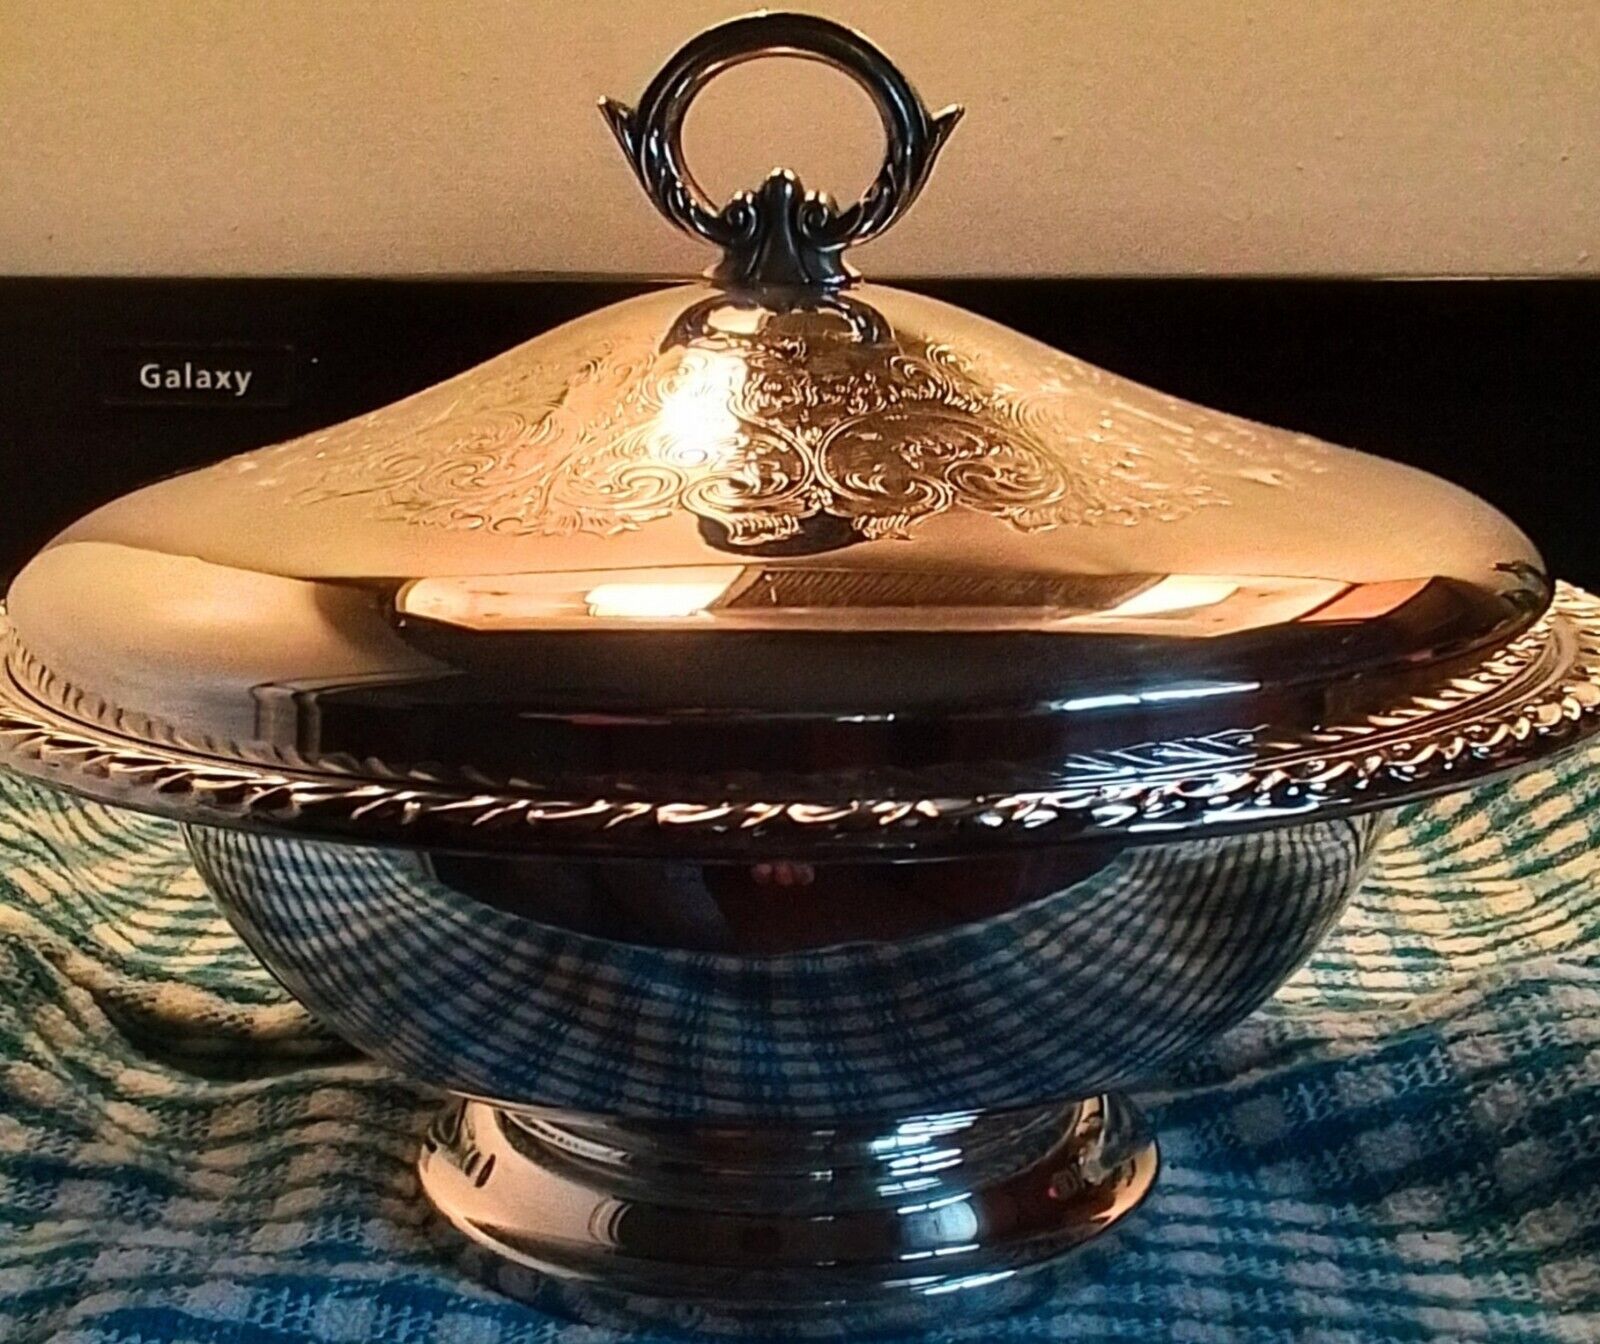 Vintage WM ROGERS Silverplate Covered Serving Dish/Bowl with PYREX Insert